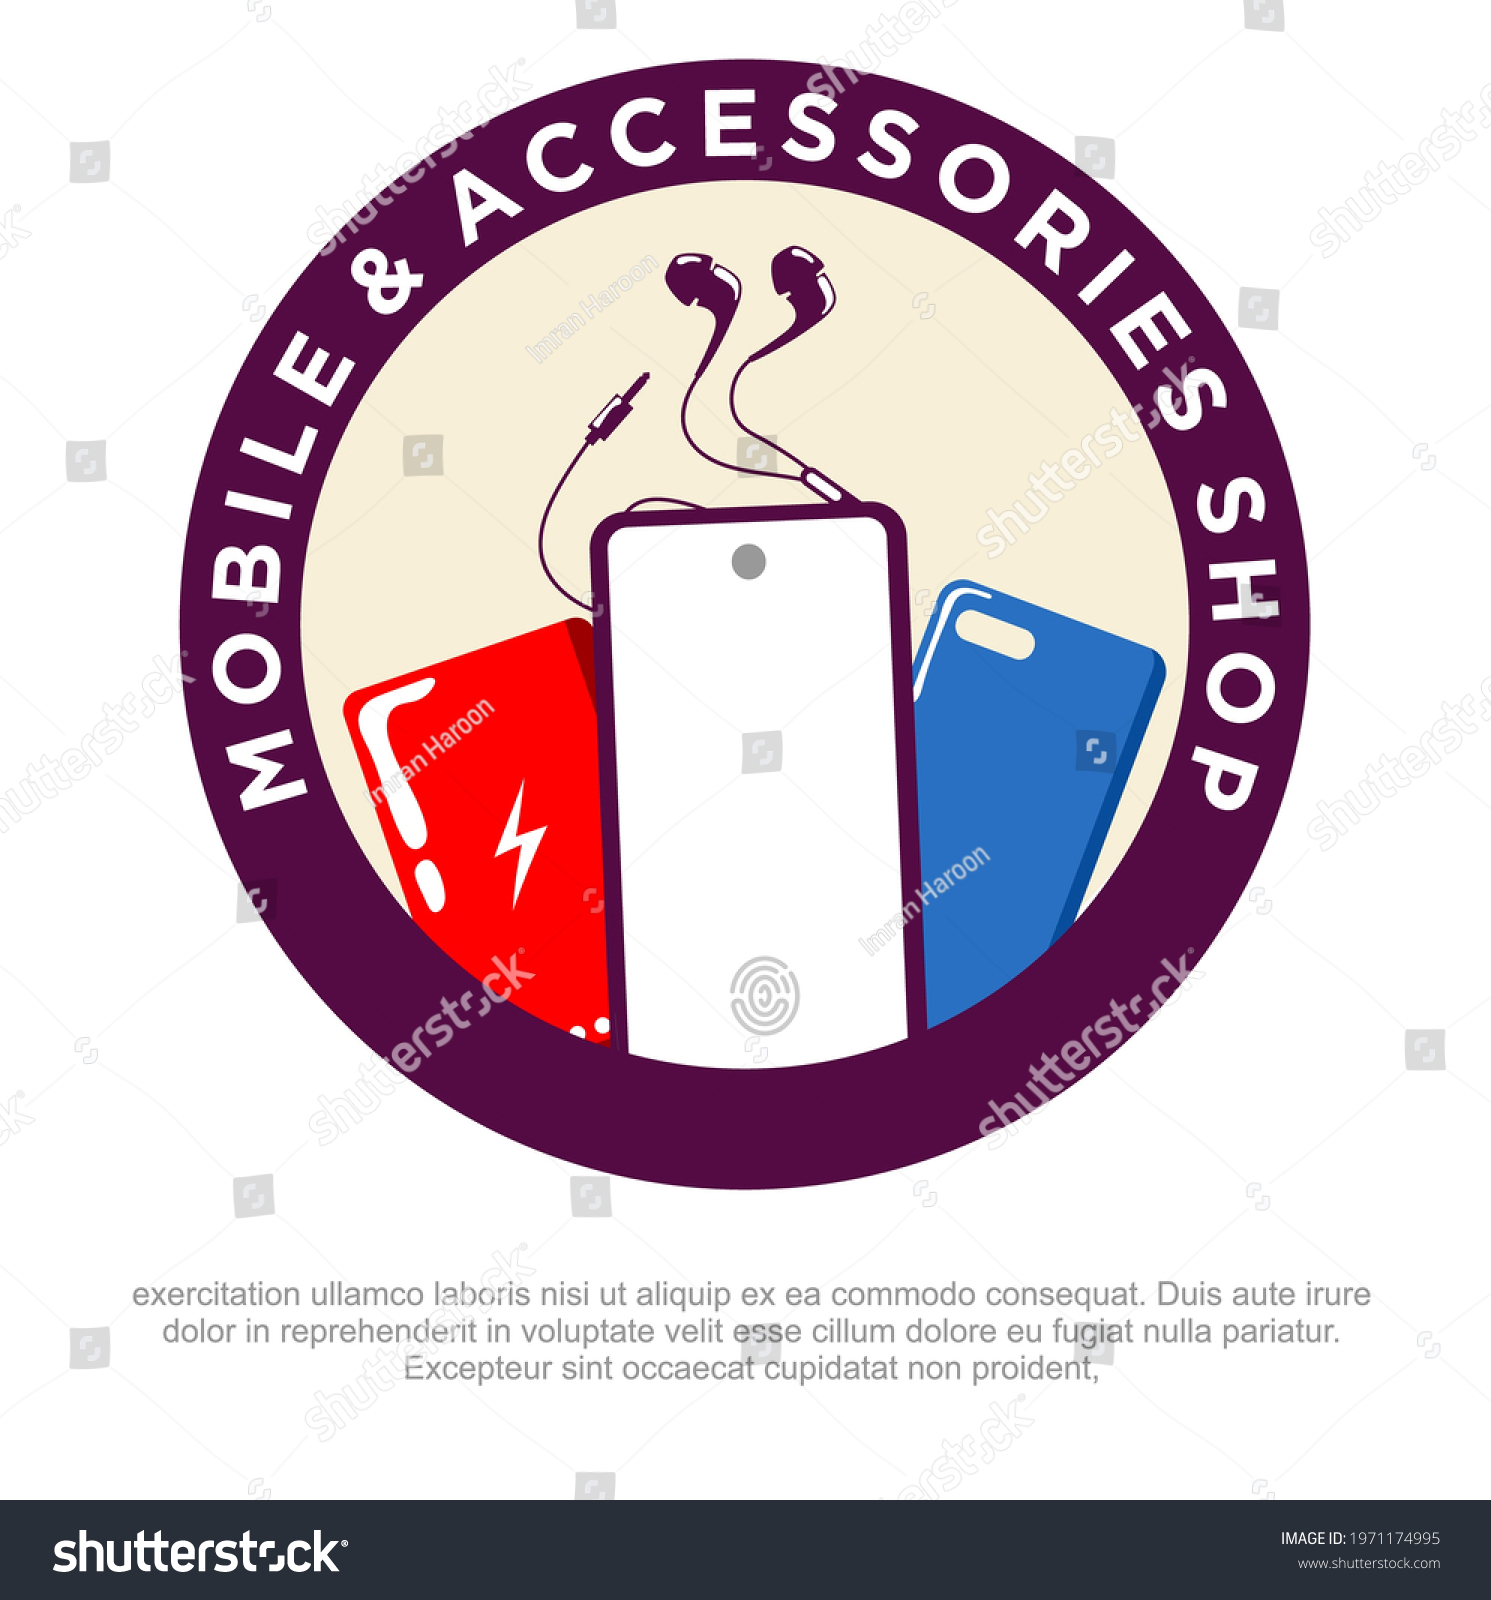 19,843 Mobile accessories logos Images, Stock Photos & Vectors ...